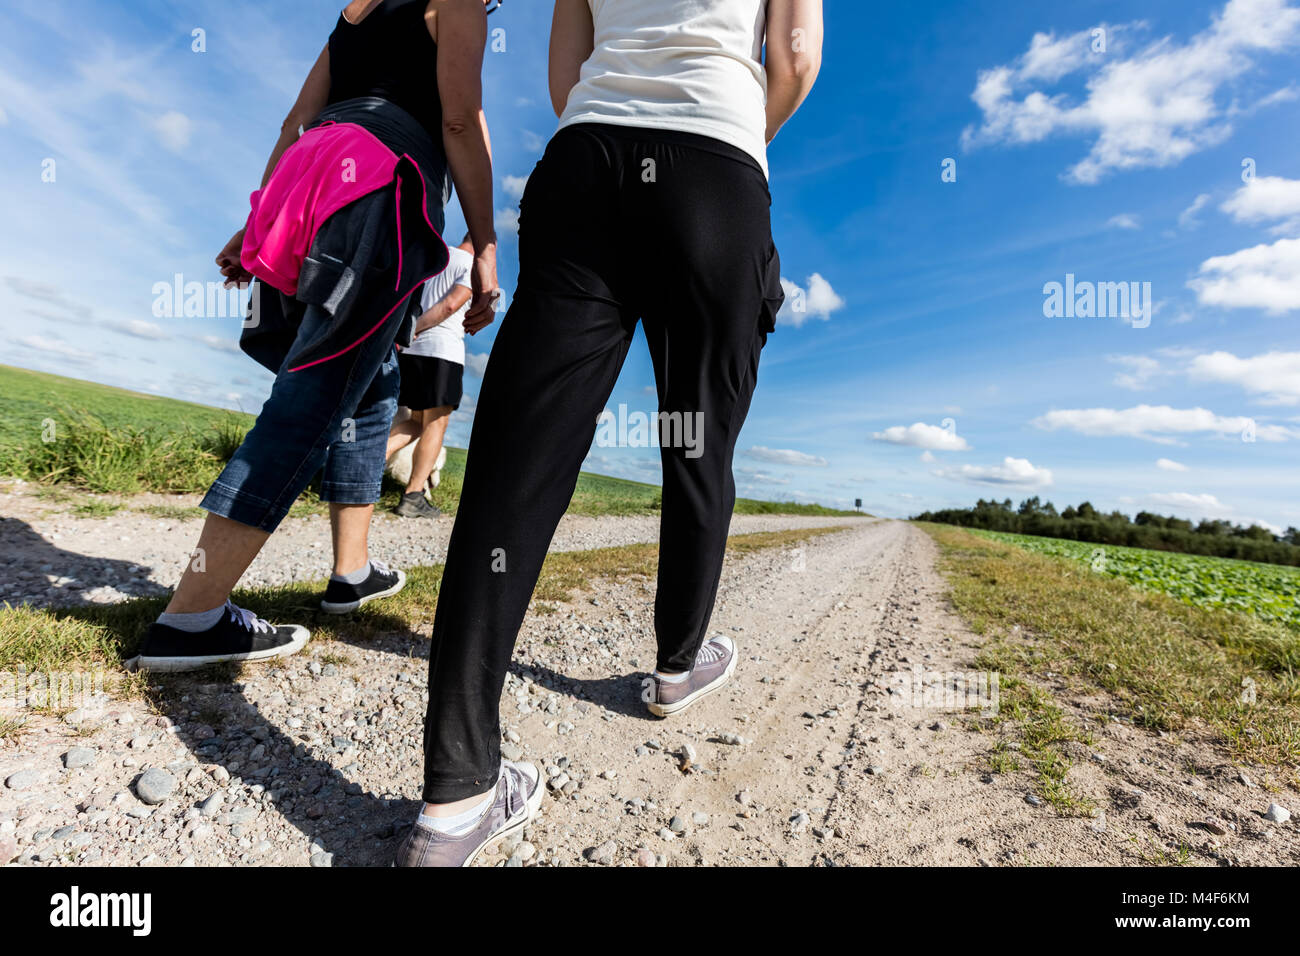 Family walk in countryside on a sunny day. Legs perspective Stock Photo